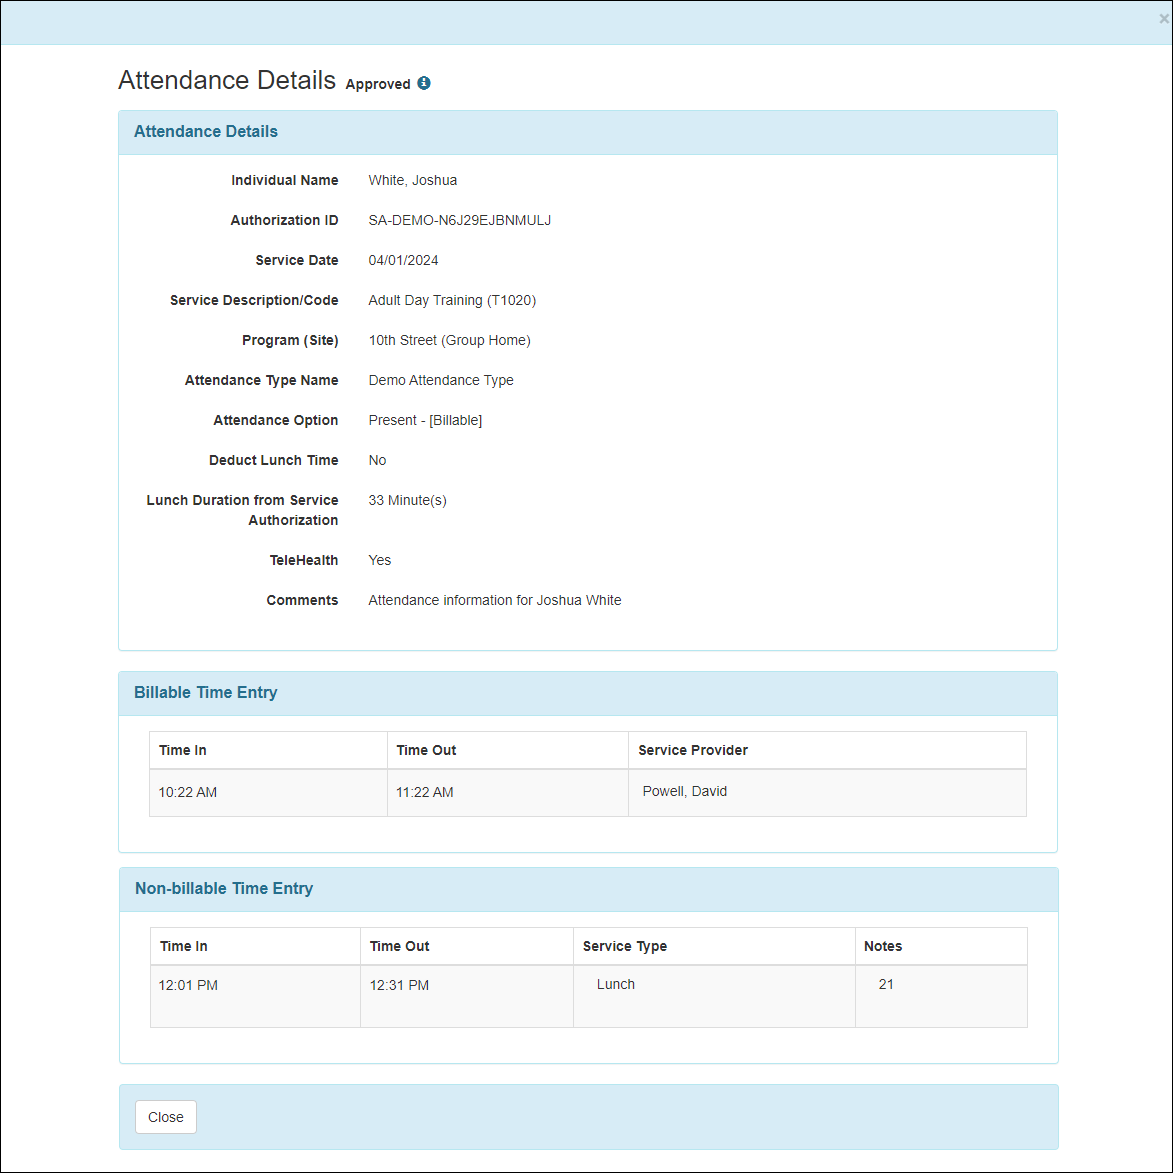 Screenshot showing the new updated user interface of the 'Attendance Details' page.